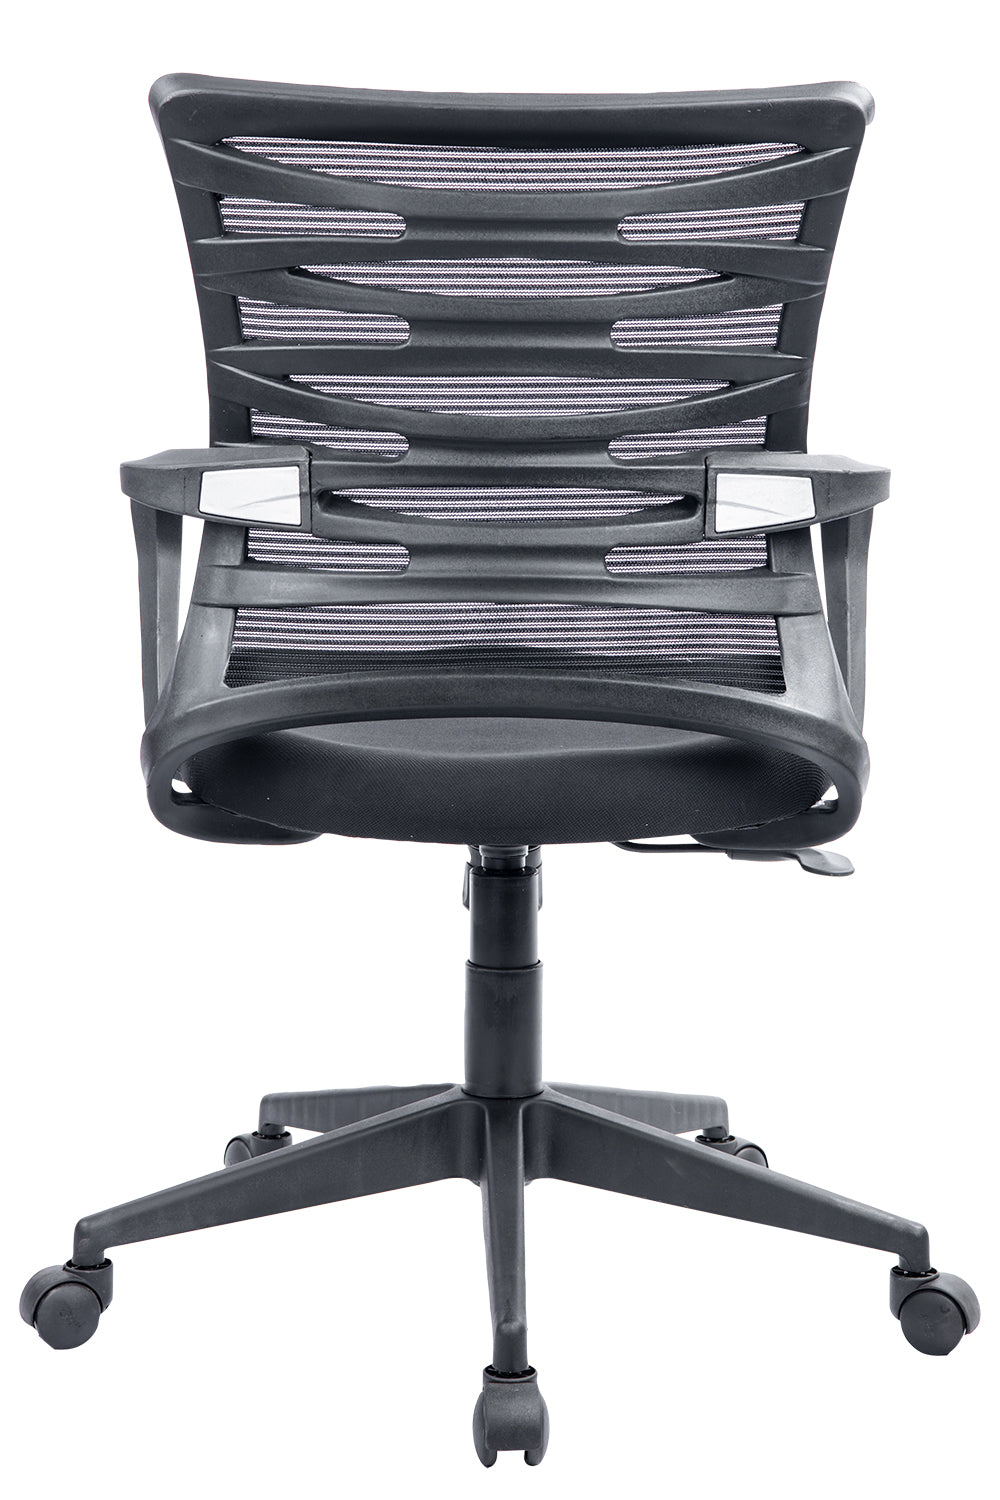 Boris Mid Back Ergonomic Office Chair With Mesh And Chrome Base- Black